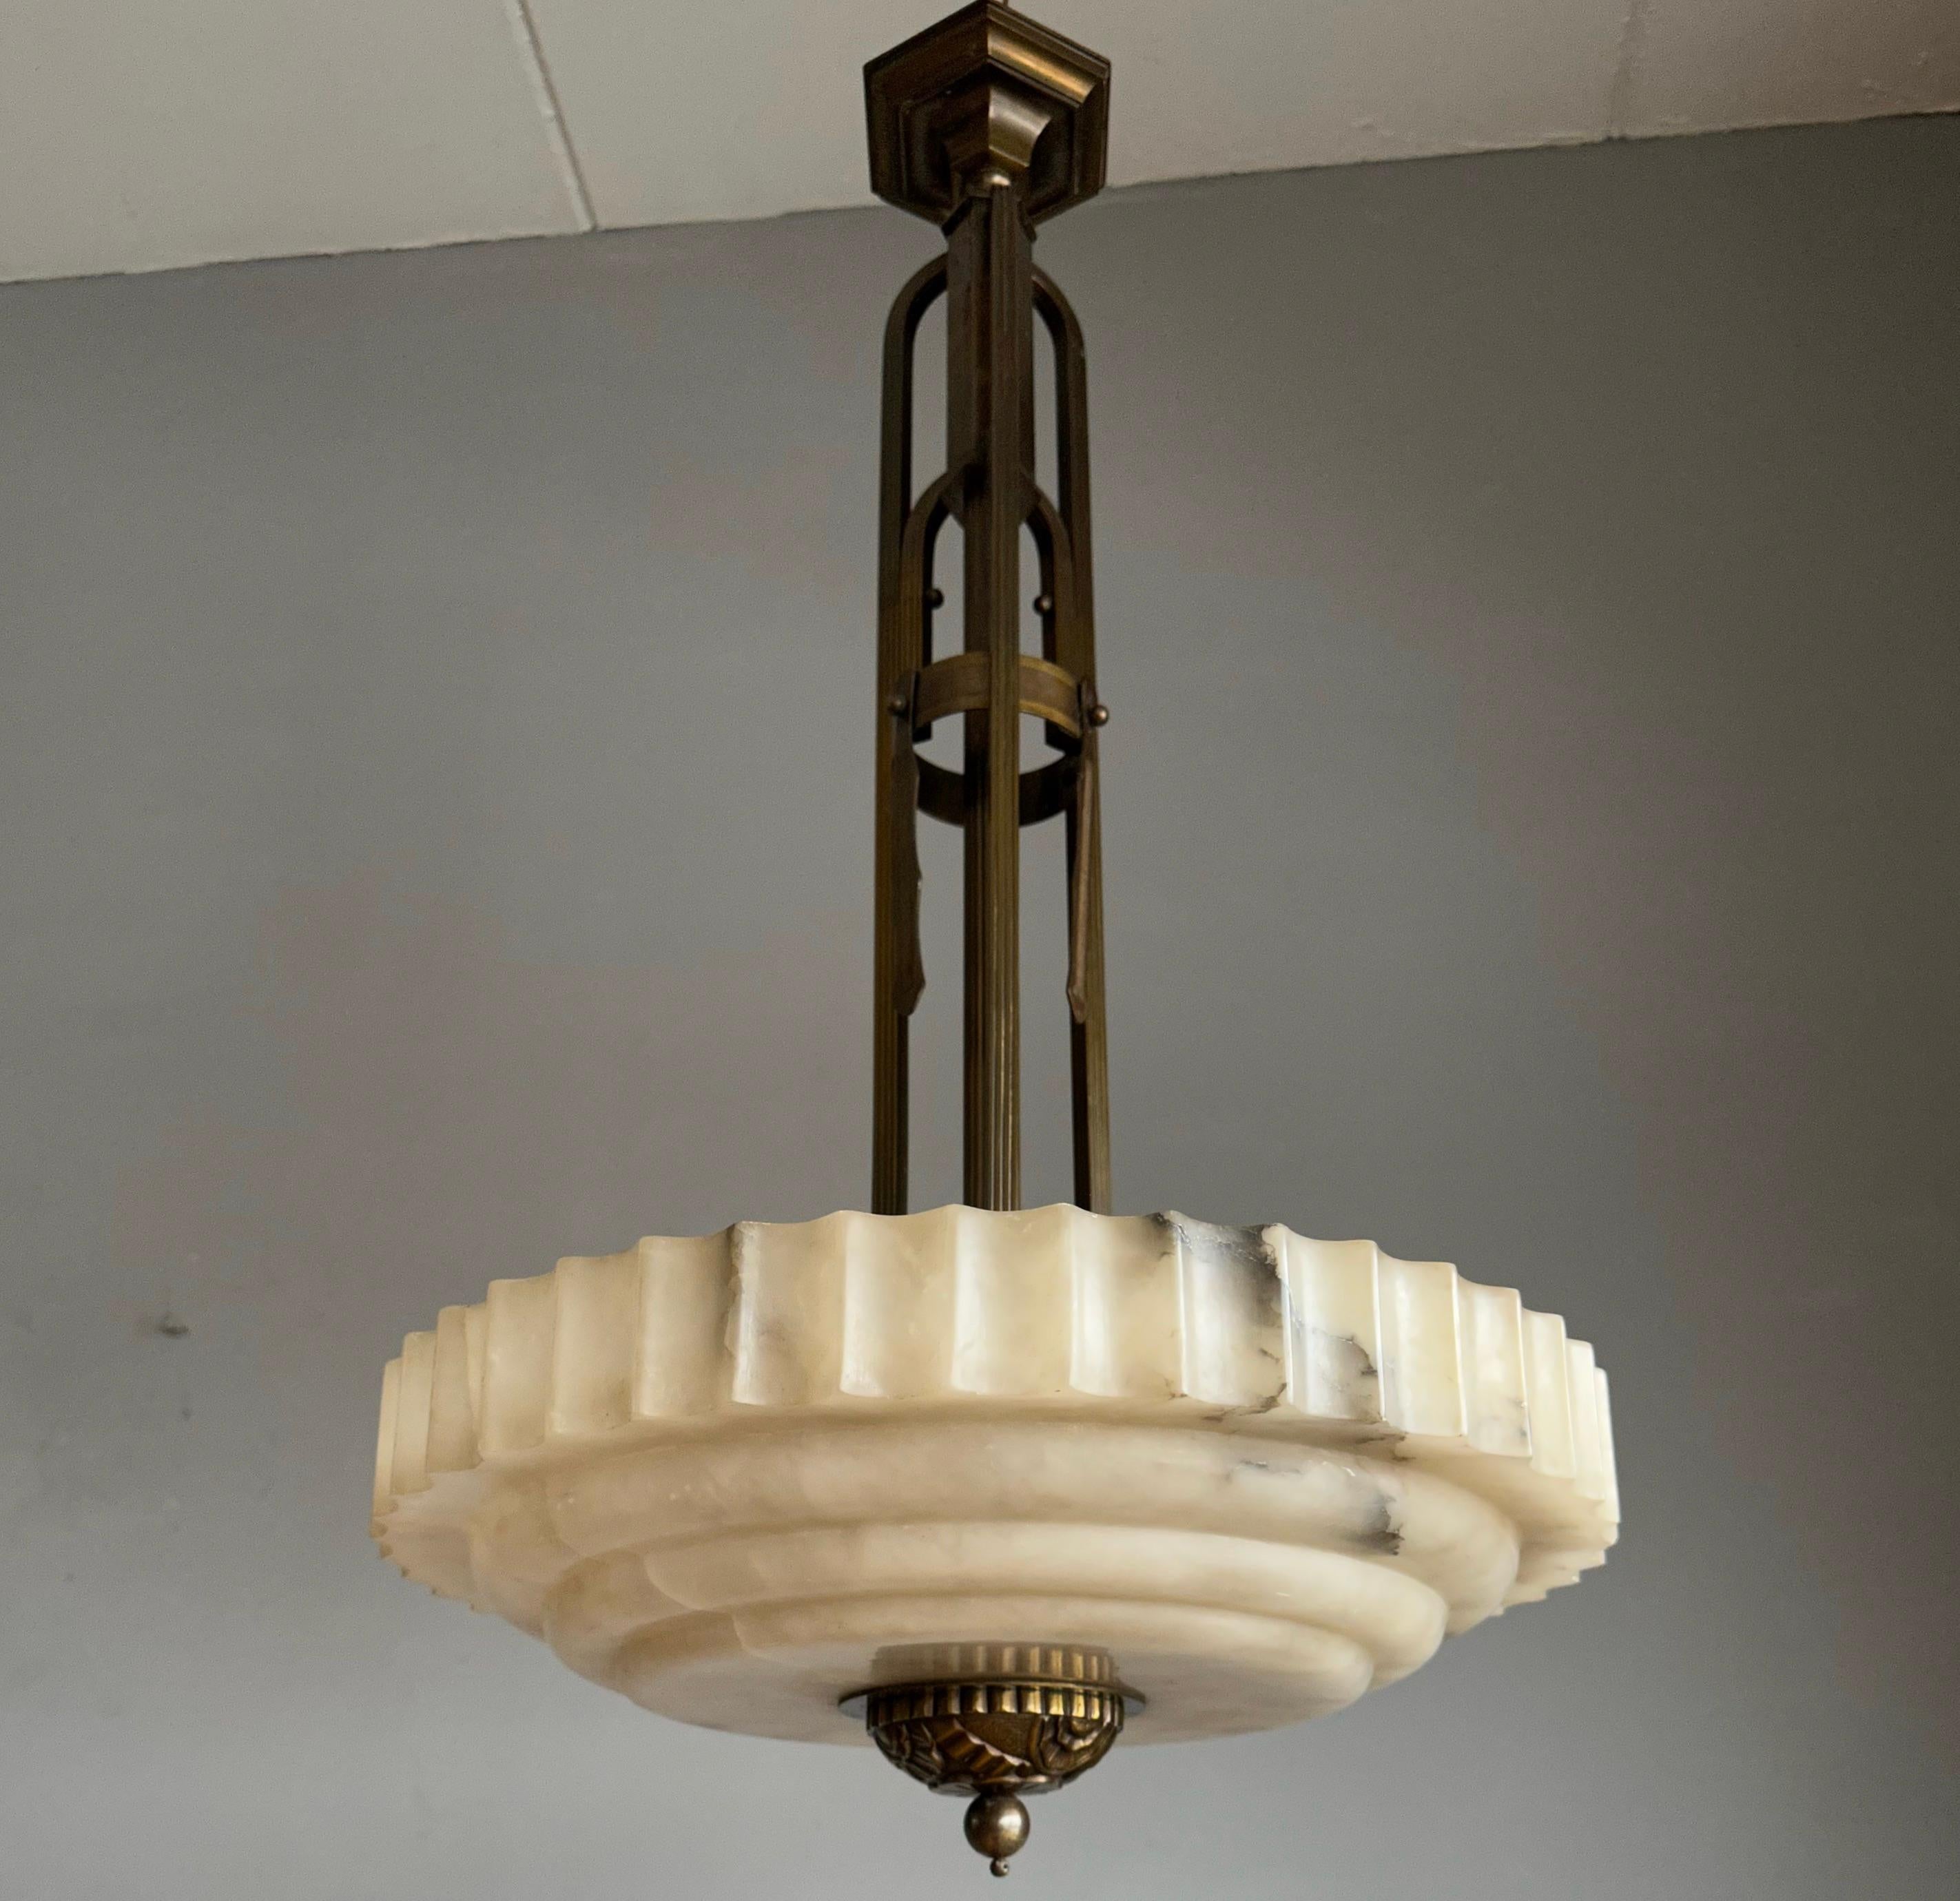 Unique and good size, alabaster chandelier of great quality and condition.

This unique Art Deco fixture from the heydays of the European Art Deco era is another one of our recent great finds. Its remarkable, circular and layered shade is all hand